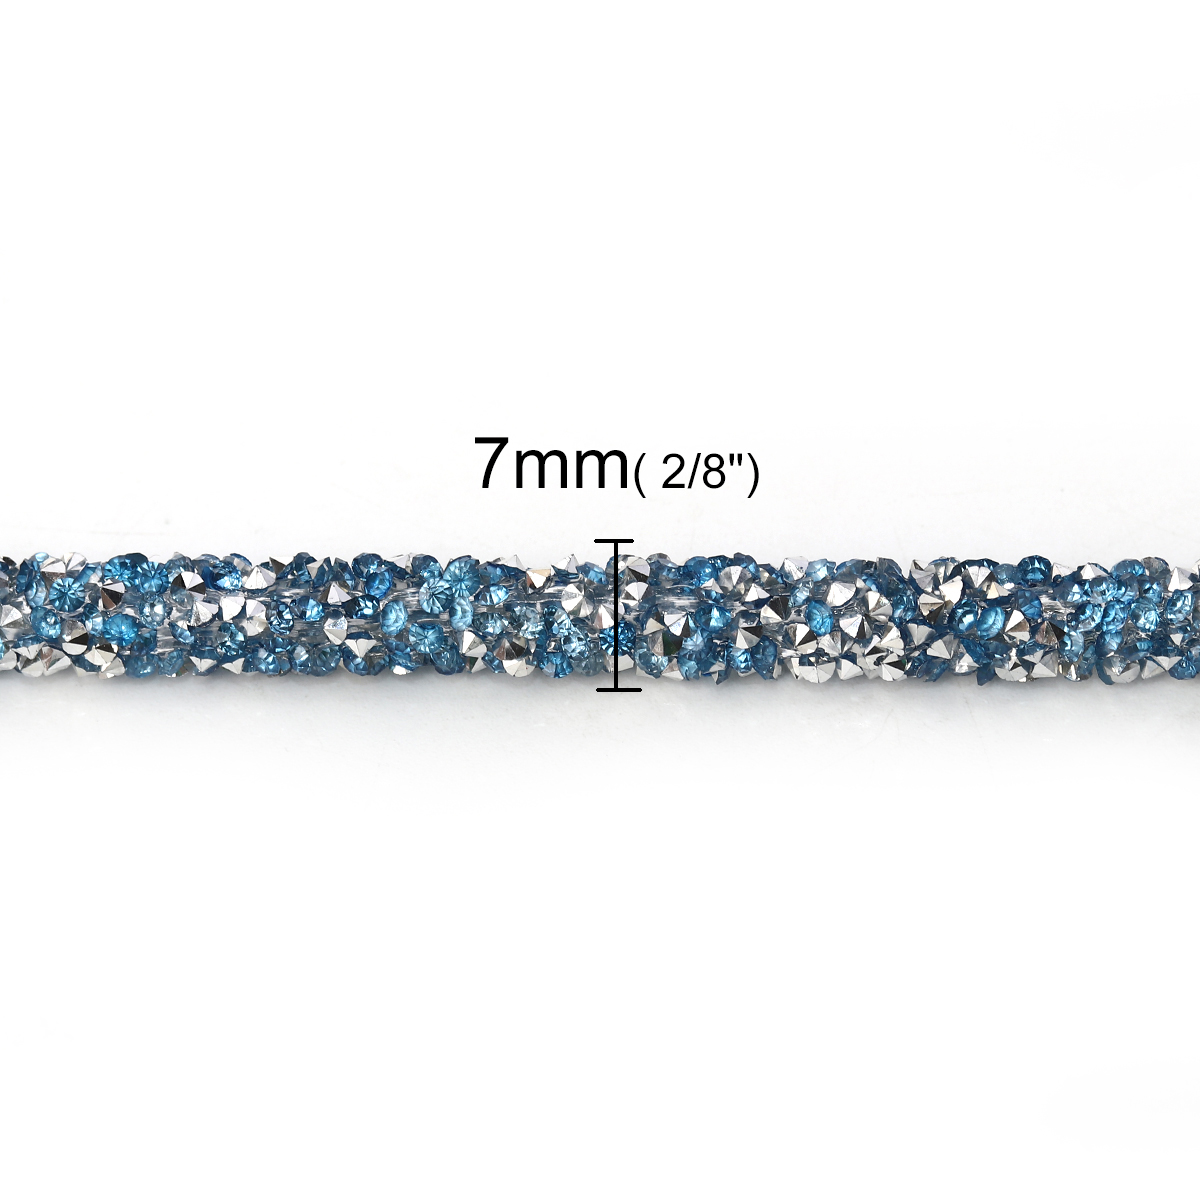 Picture of PVC Jewelry Cord Rope Light Blue With Hot Fix Rhinestone 7mm( 2/8"), 2 M